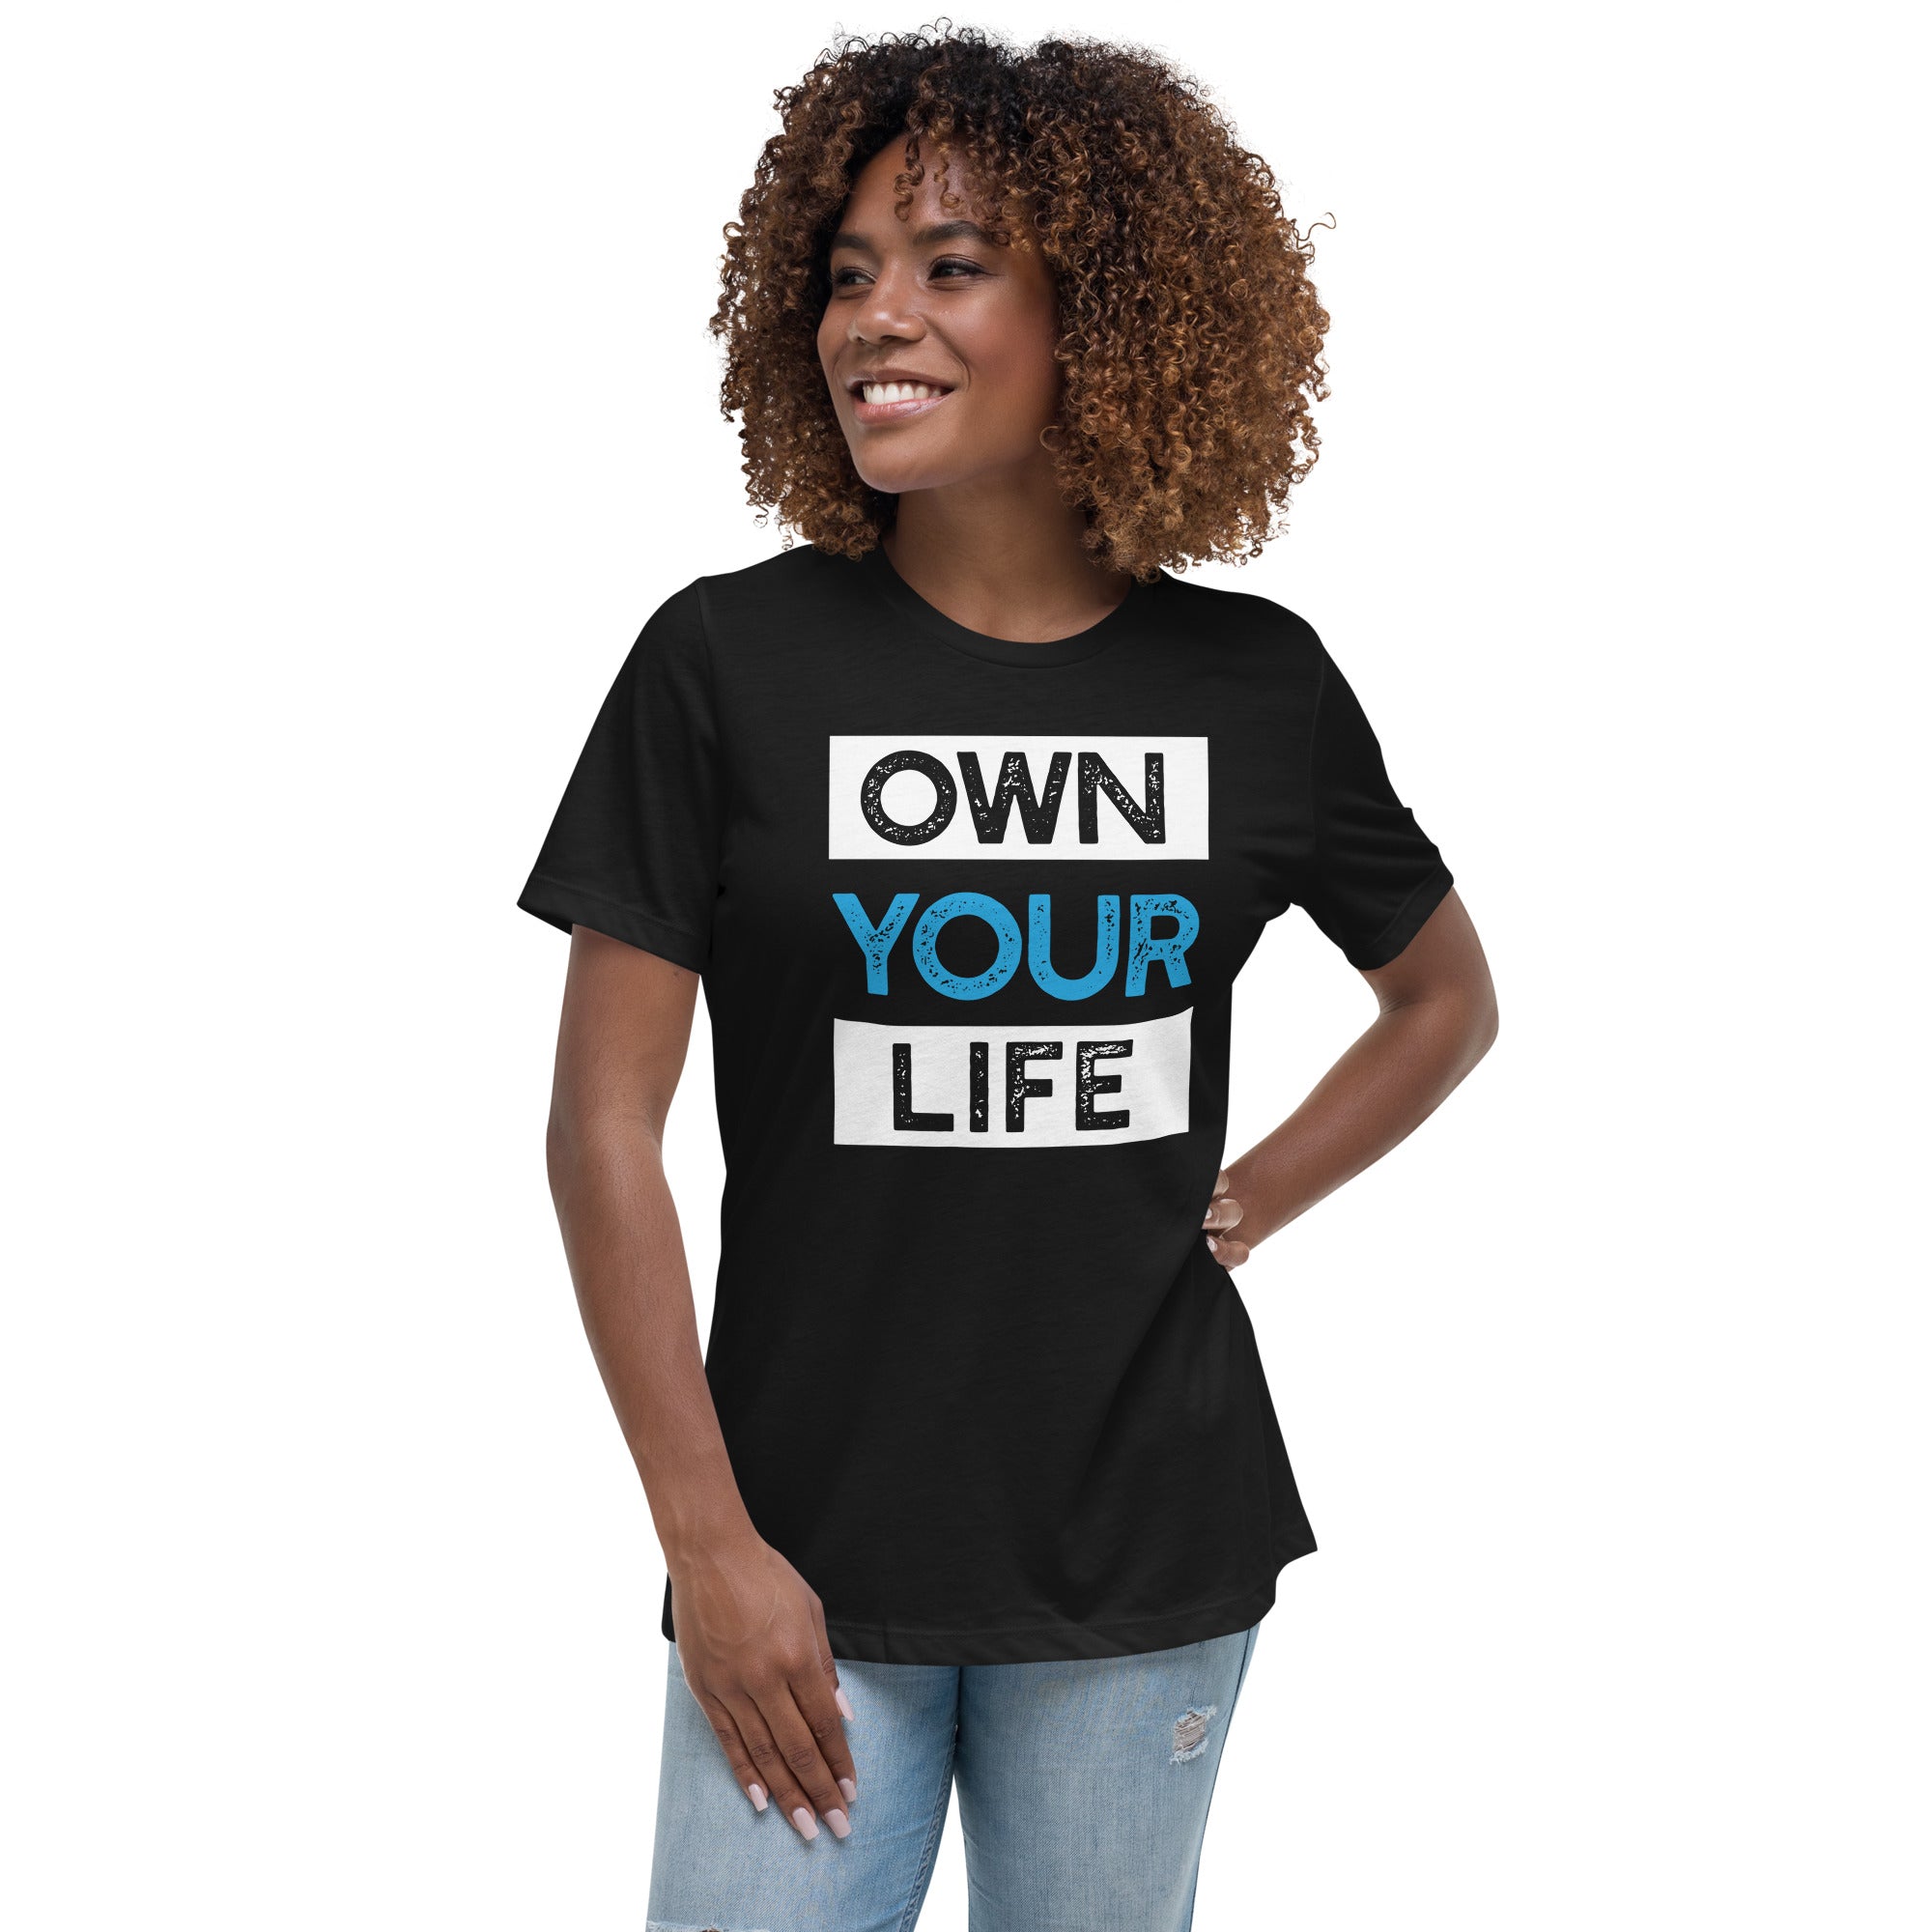 Own Your Life Women's Relaxed T-Shirt (On Demand Printing)